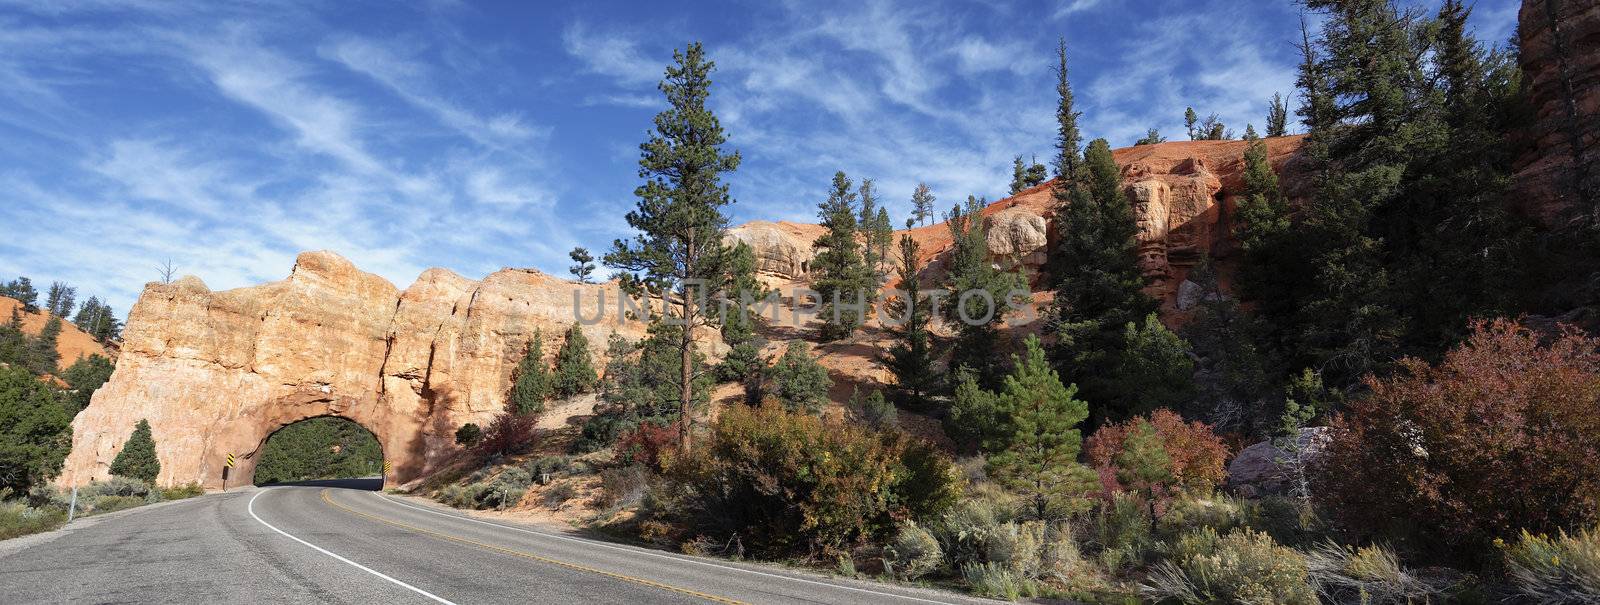 panoramic view of Road to Bryce Canyon by vwalakte